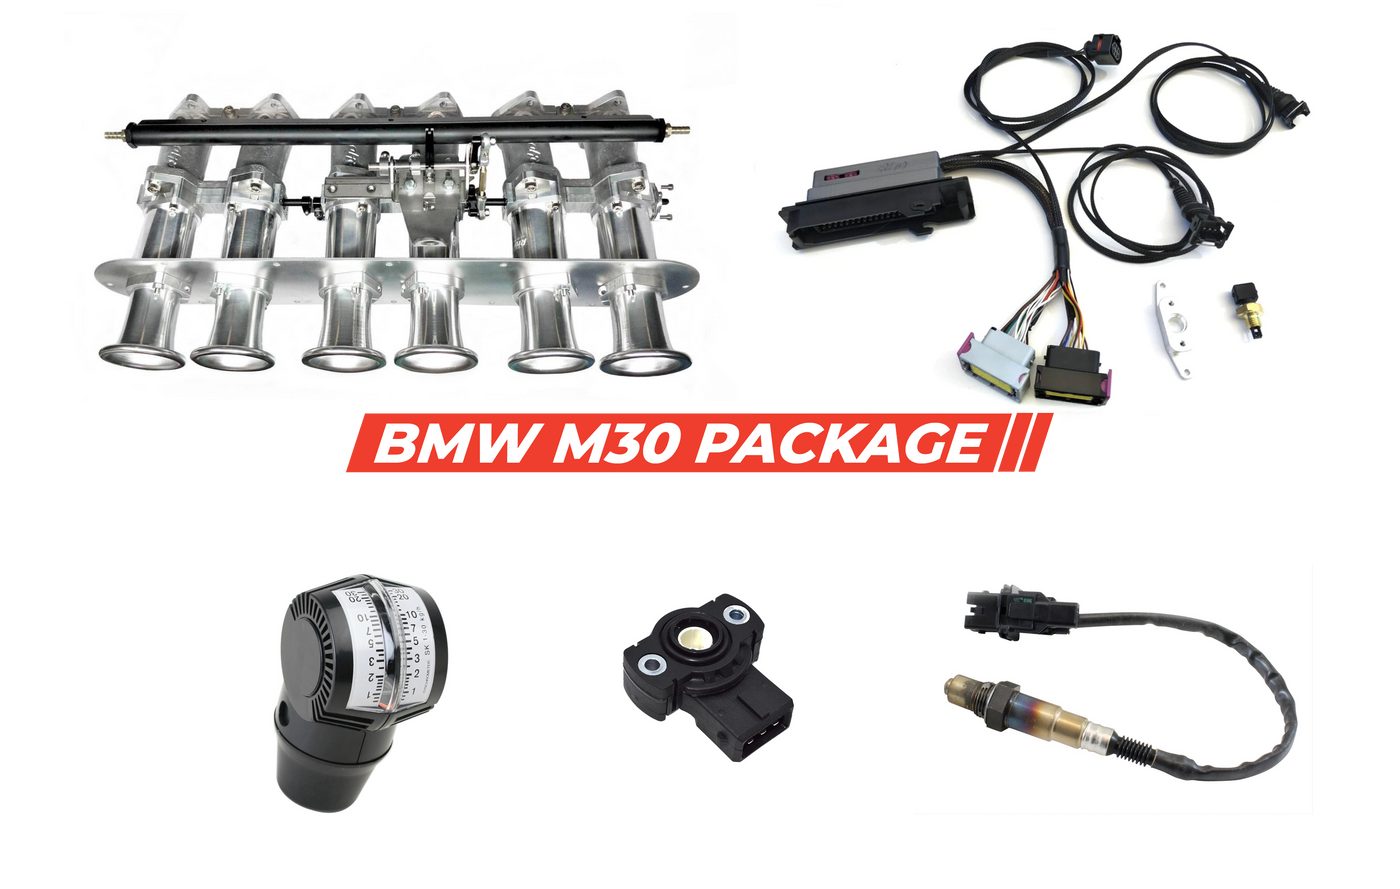 BMW M30 - ADAPTER ITB CONVERSION PACKAGE [FOR BMW E24, E32, E34]